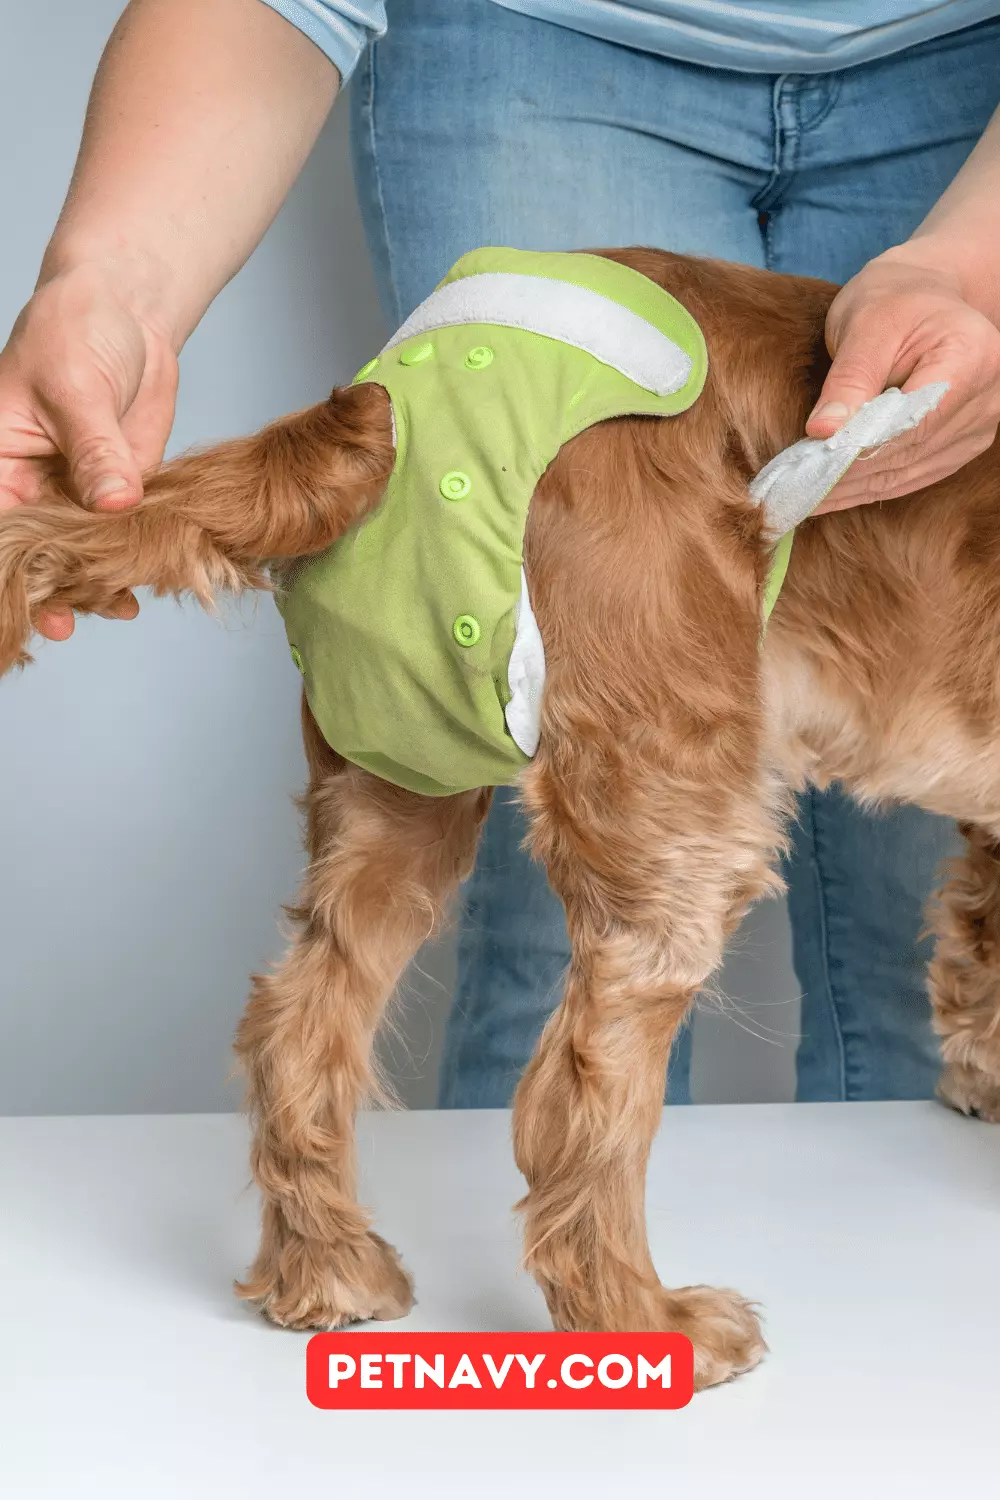 DIY: 5 Simple Free Patterns for Male Dog Diapers